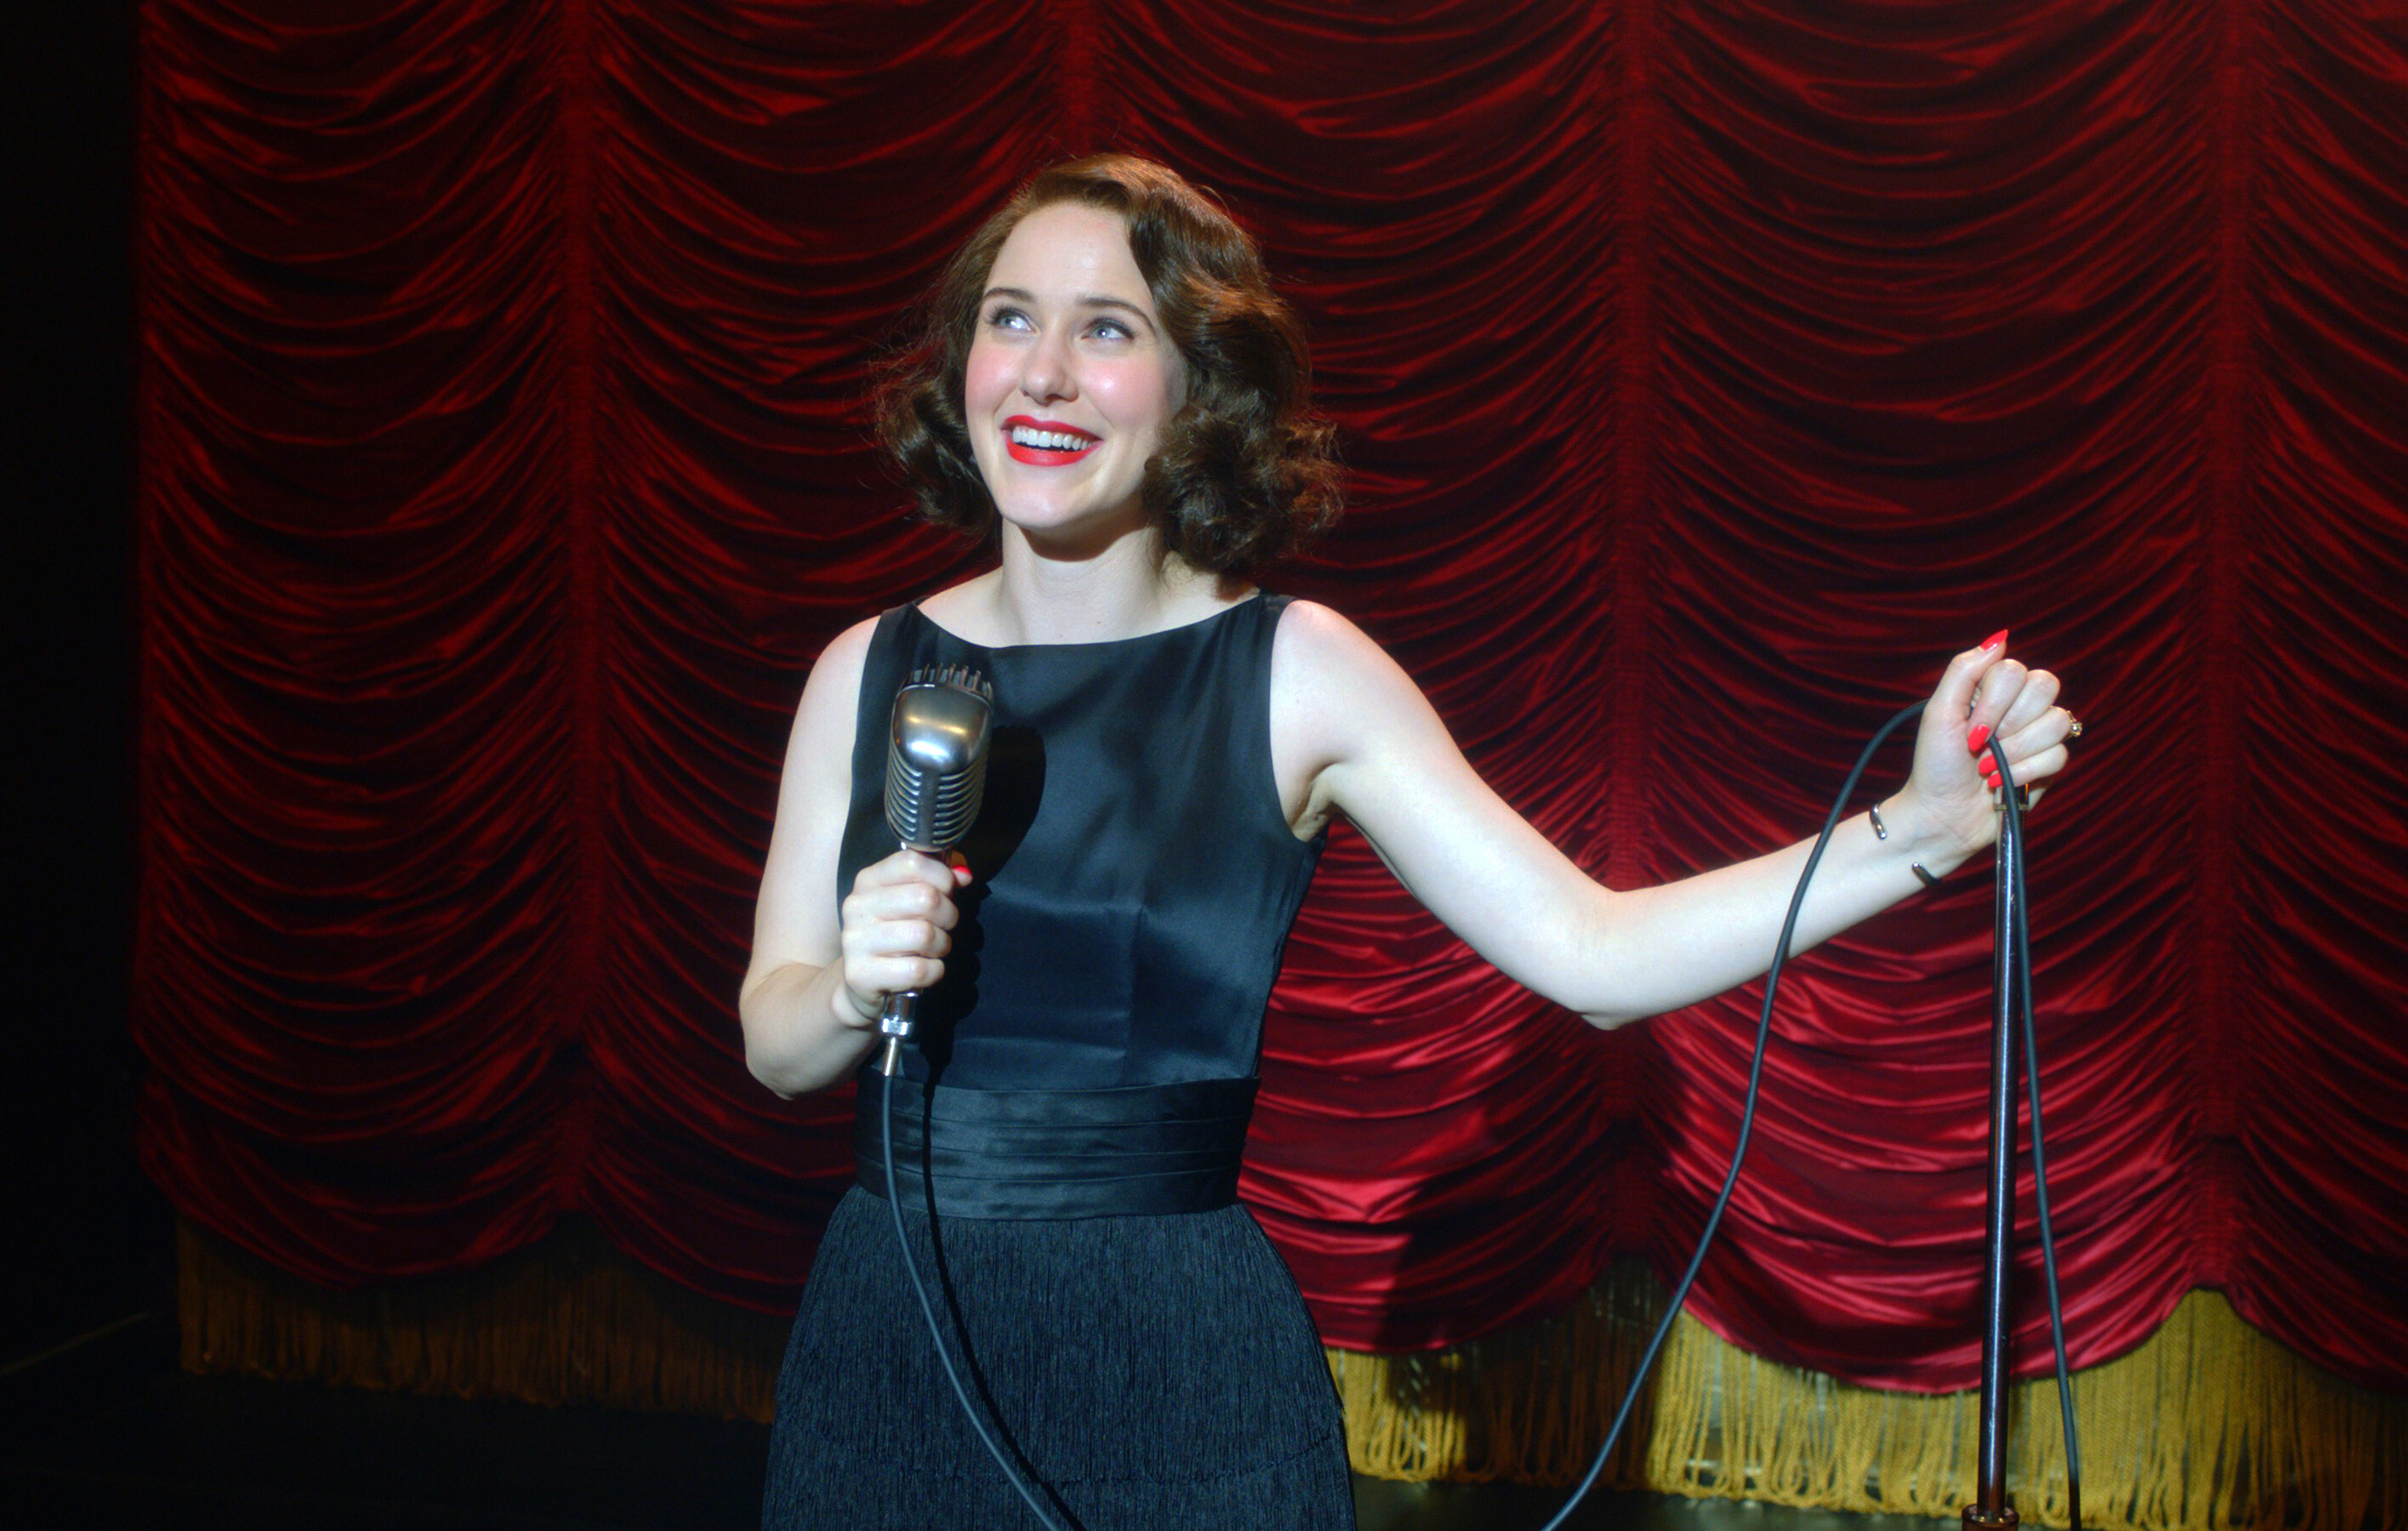 The Marvelous Mrs. Maisel: Rachel Brosnahan as a Jewish American housewife who discovers her flair for stand-up comedy. 2840x1800 HD Wallpaper.